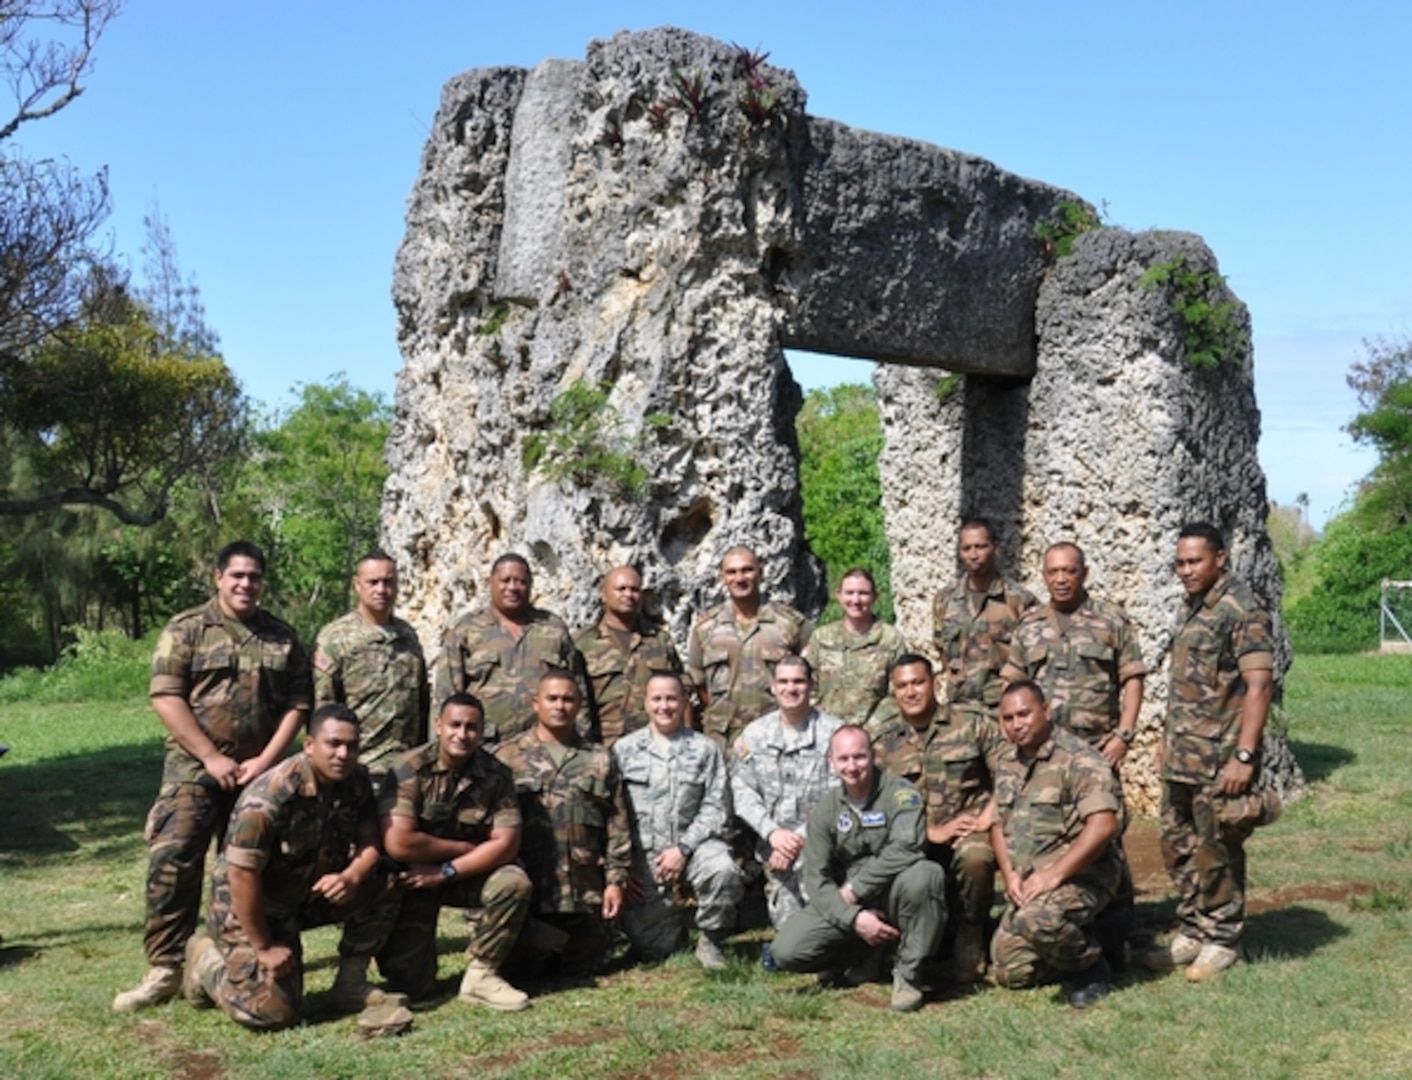 Members of the Nevada National Guard and His Majesty's Armed Forces pose in front of Ha'amonga 'a Maui, a historical monument built in Tonga about 1200.  The forces met for a weeklong communications knowledge exchange. 